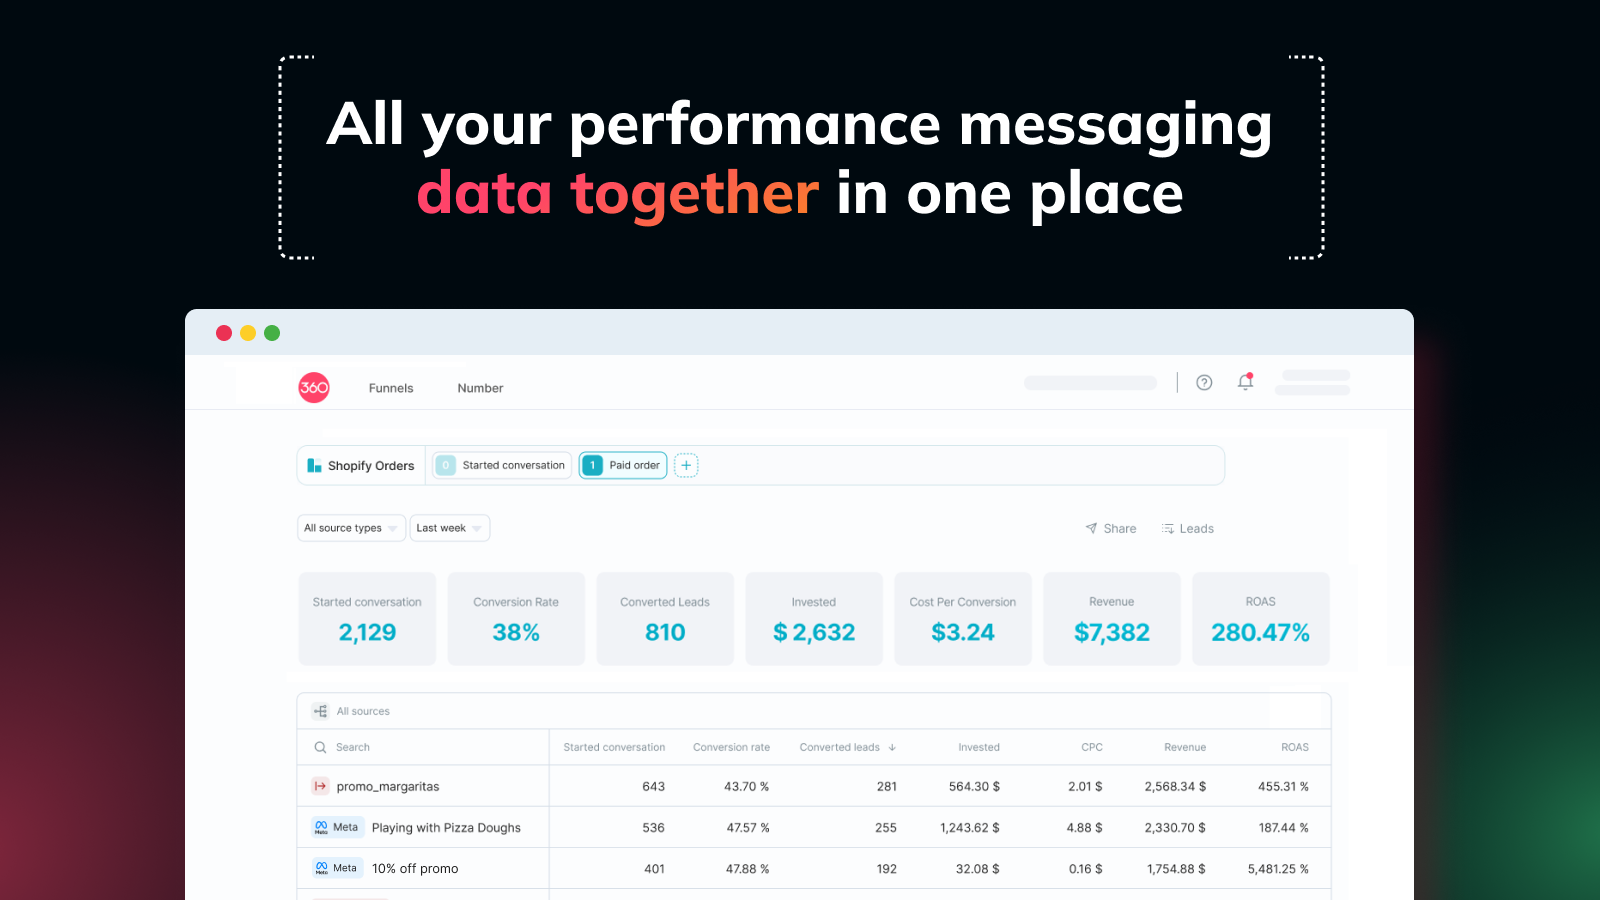 Simple dashboard with all WhatsApp marketing data in one place